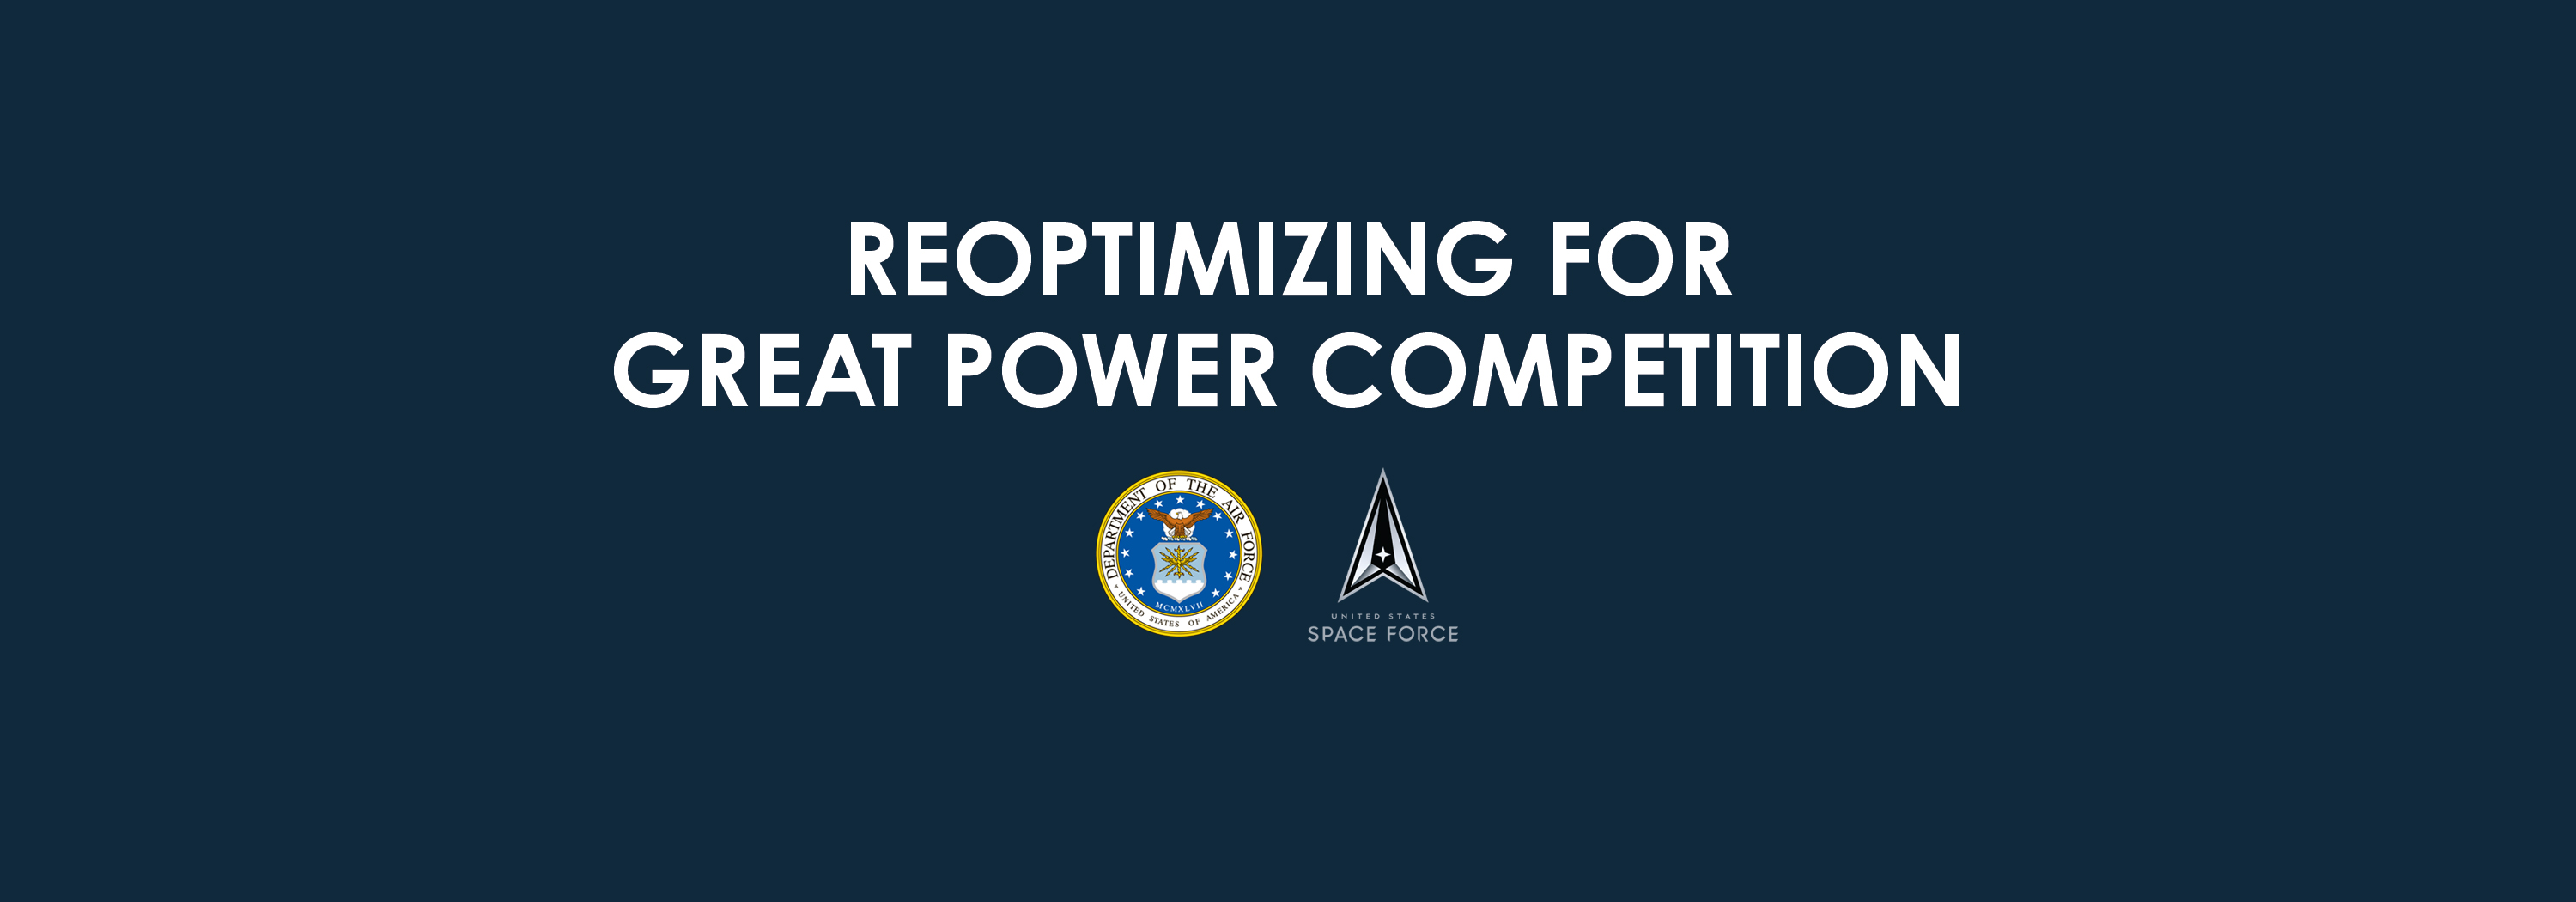 Reoptimization for Great Power Competition